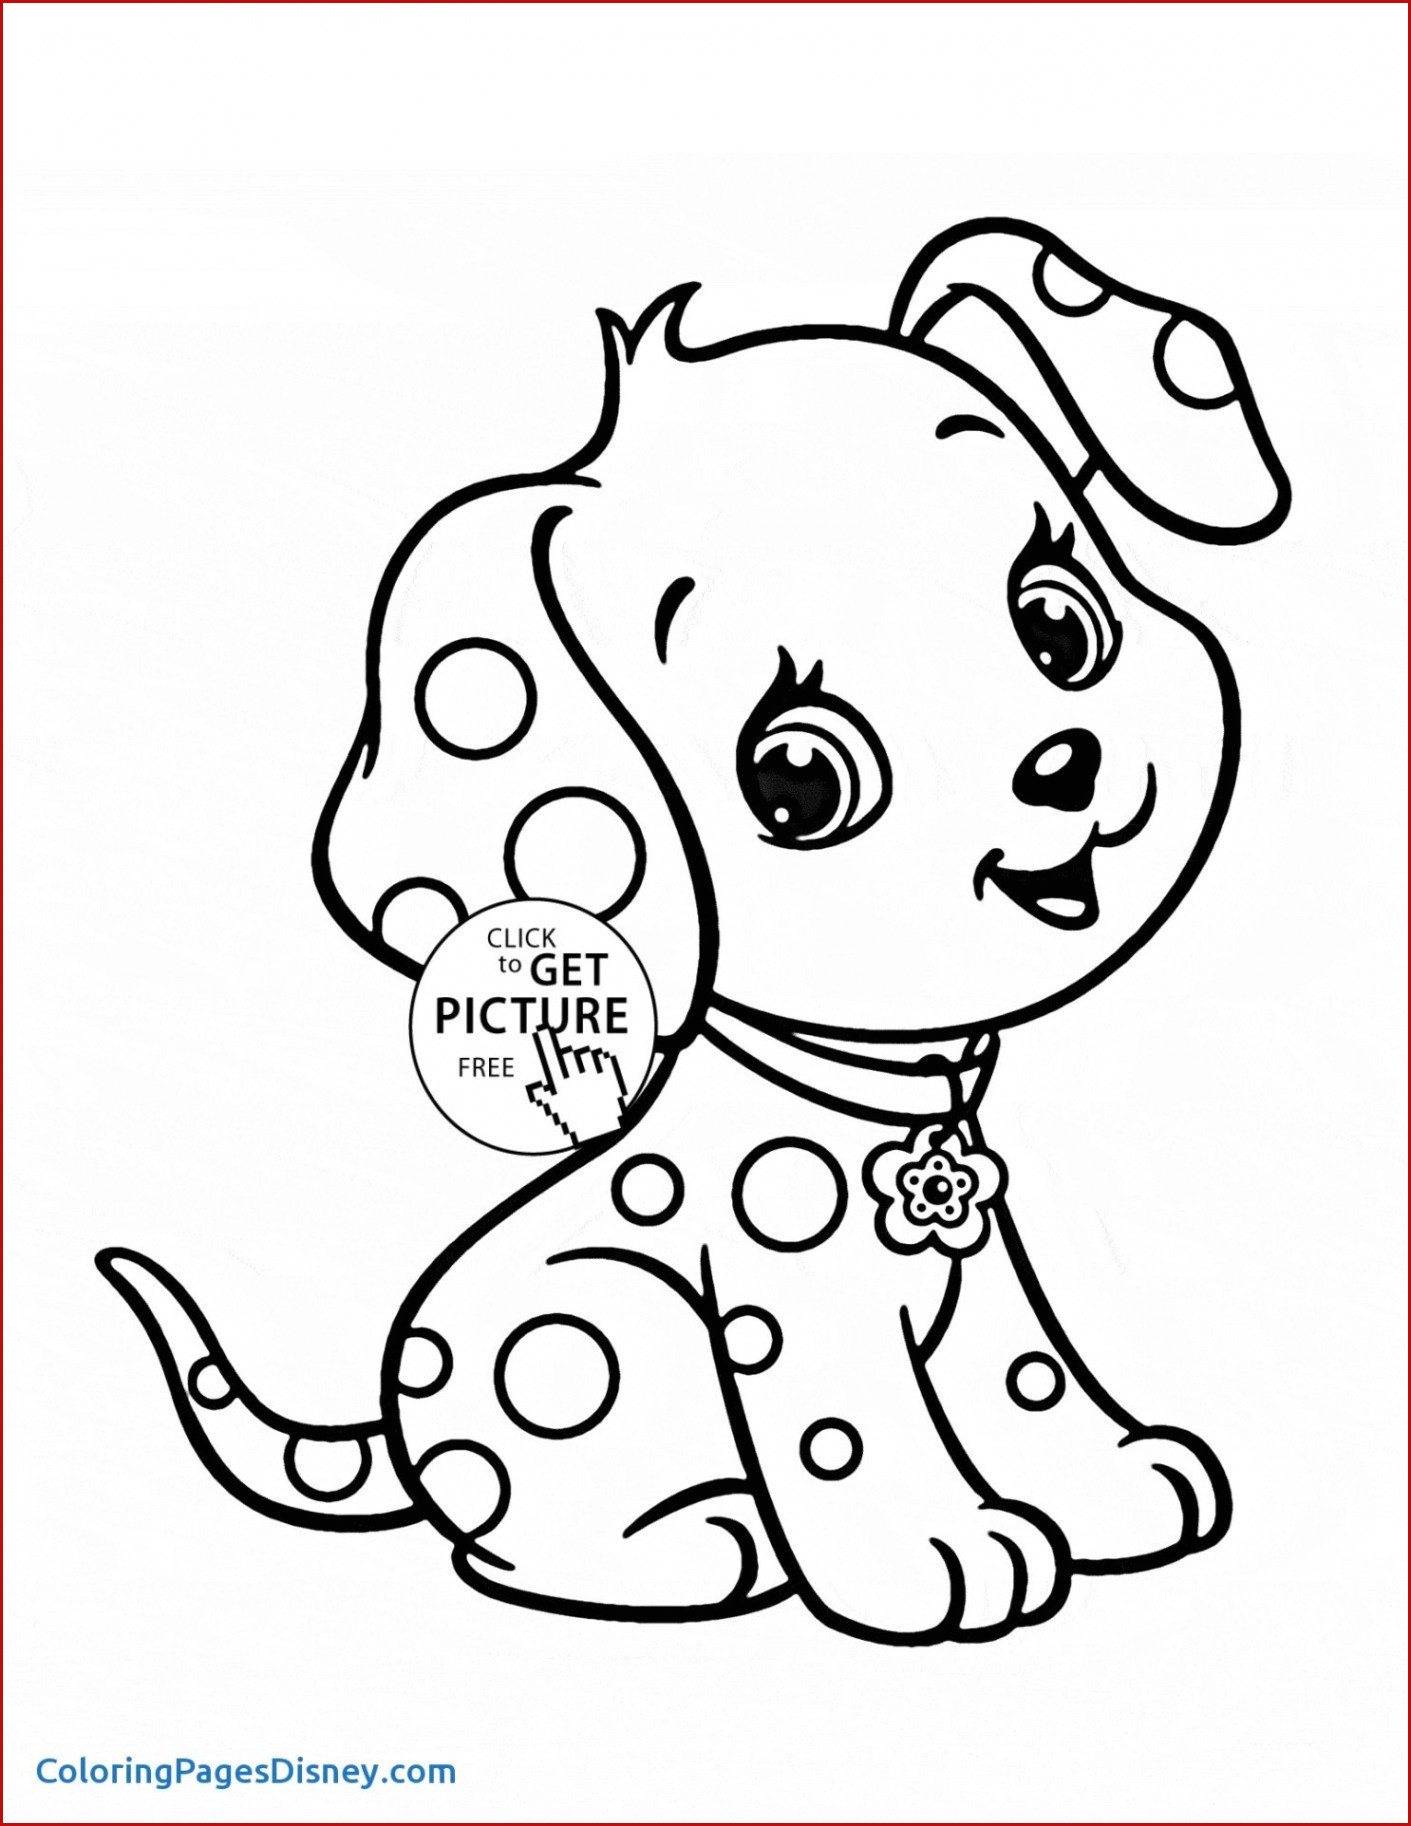 Candyland Characters Coloring Pages Beautiful Animated Characters Coloring Pages Nocn